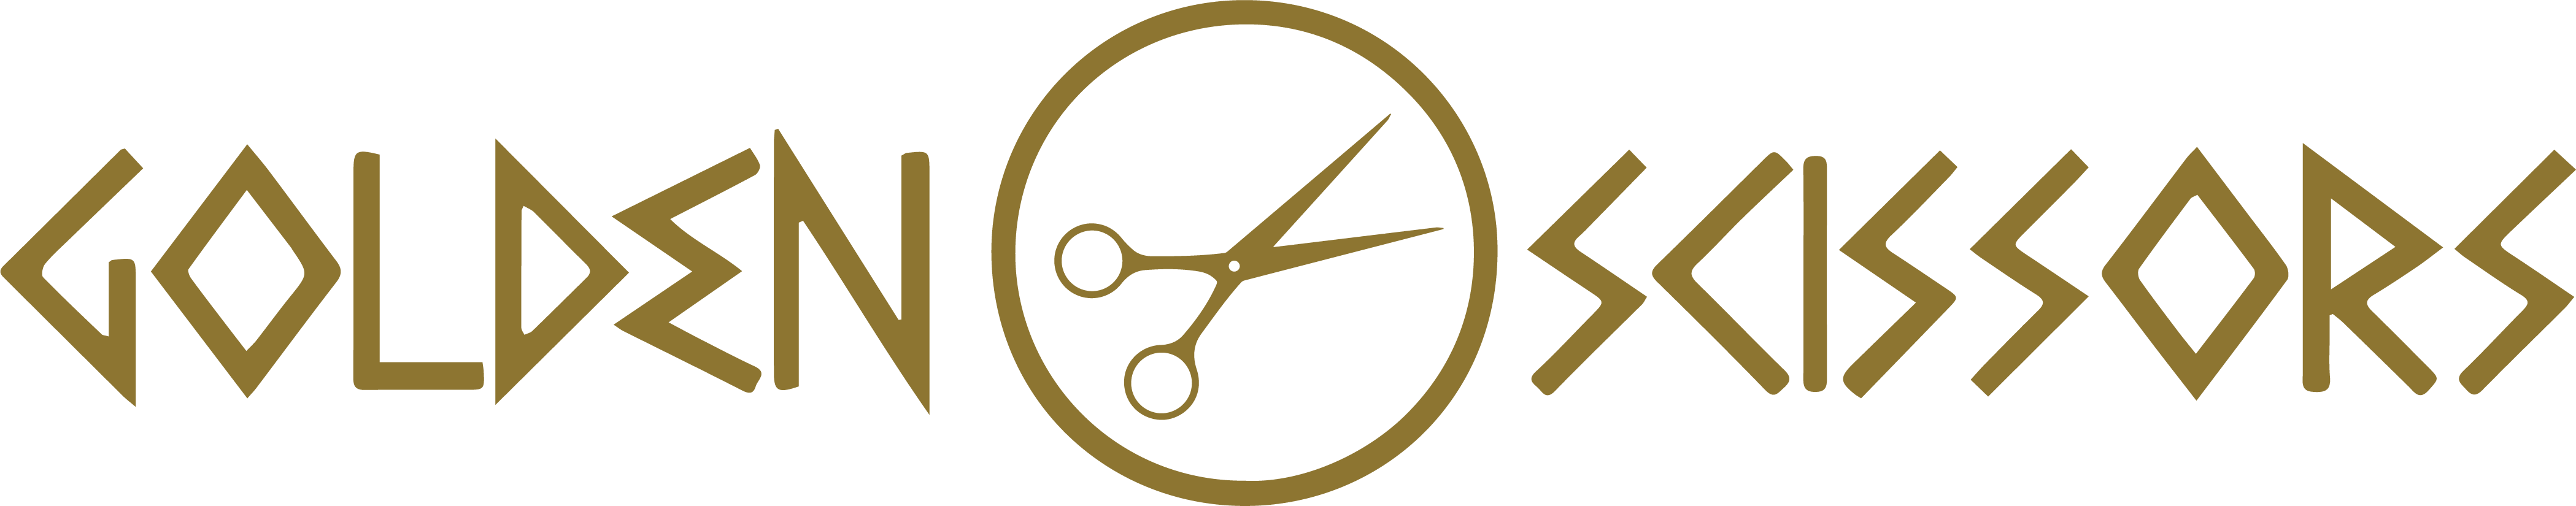 Gold Scissor Hair Free PNG Image